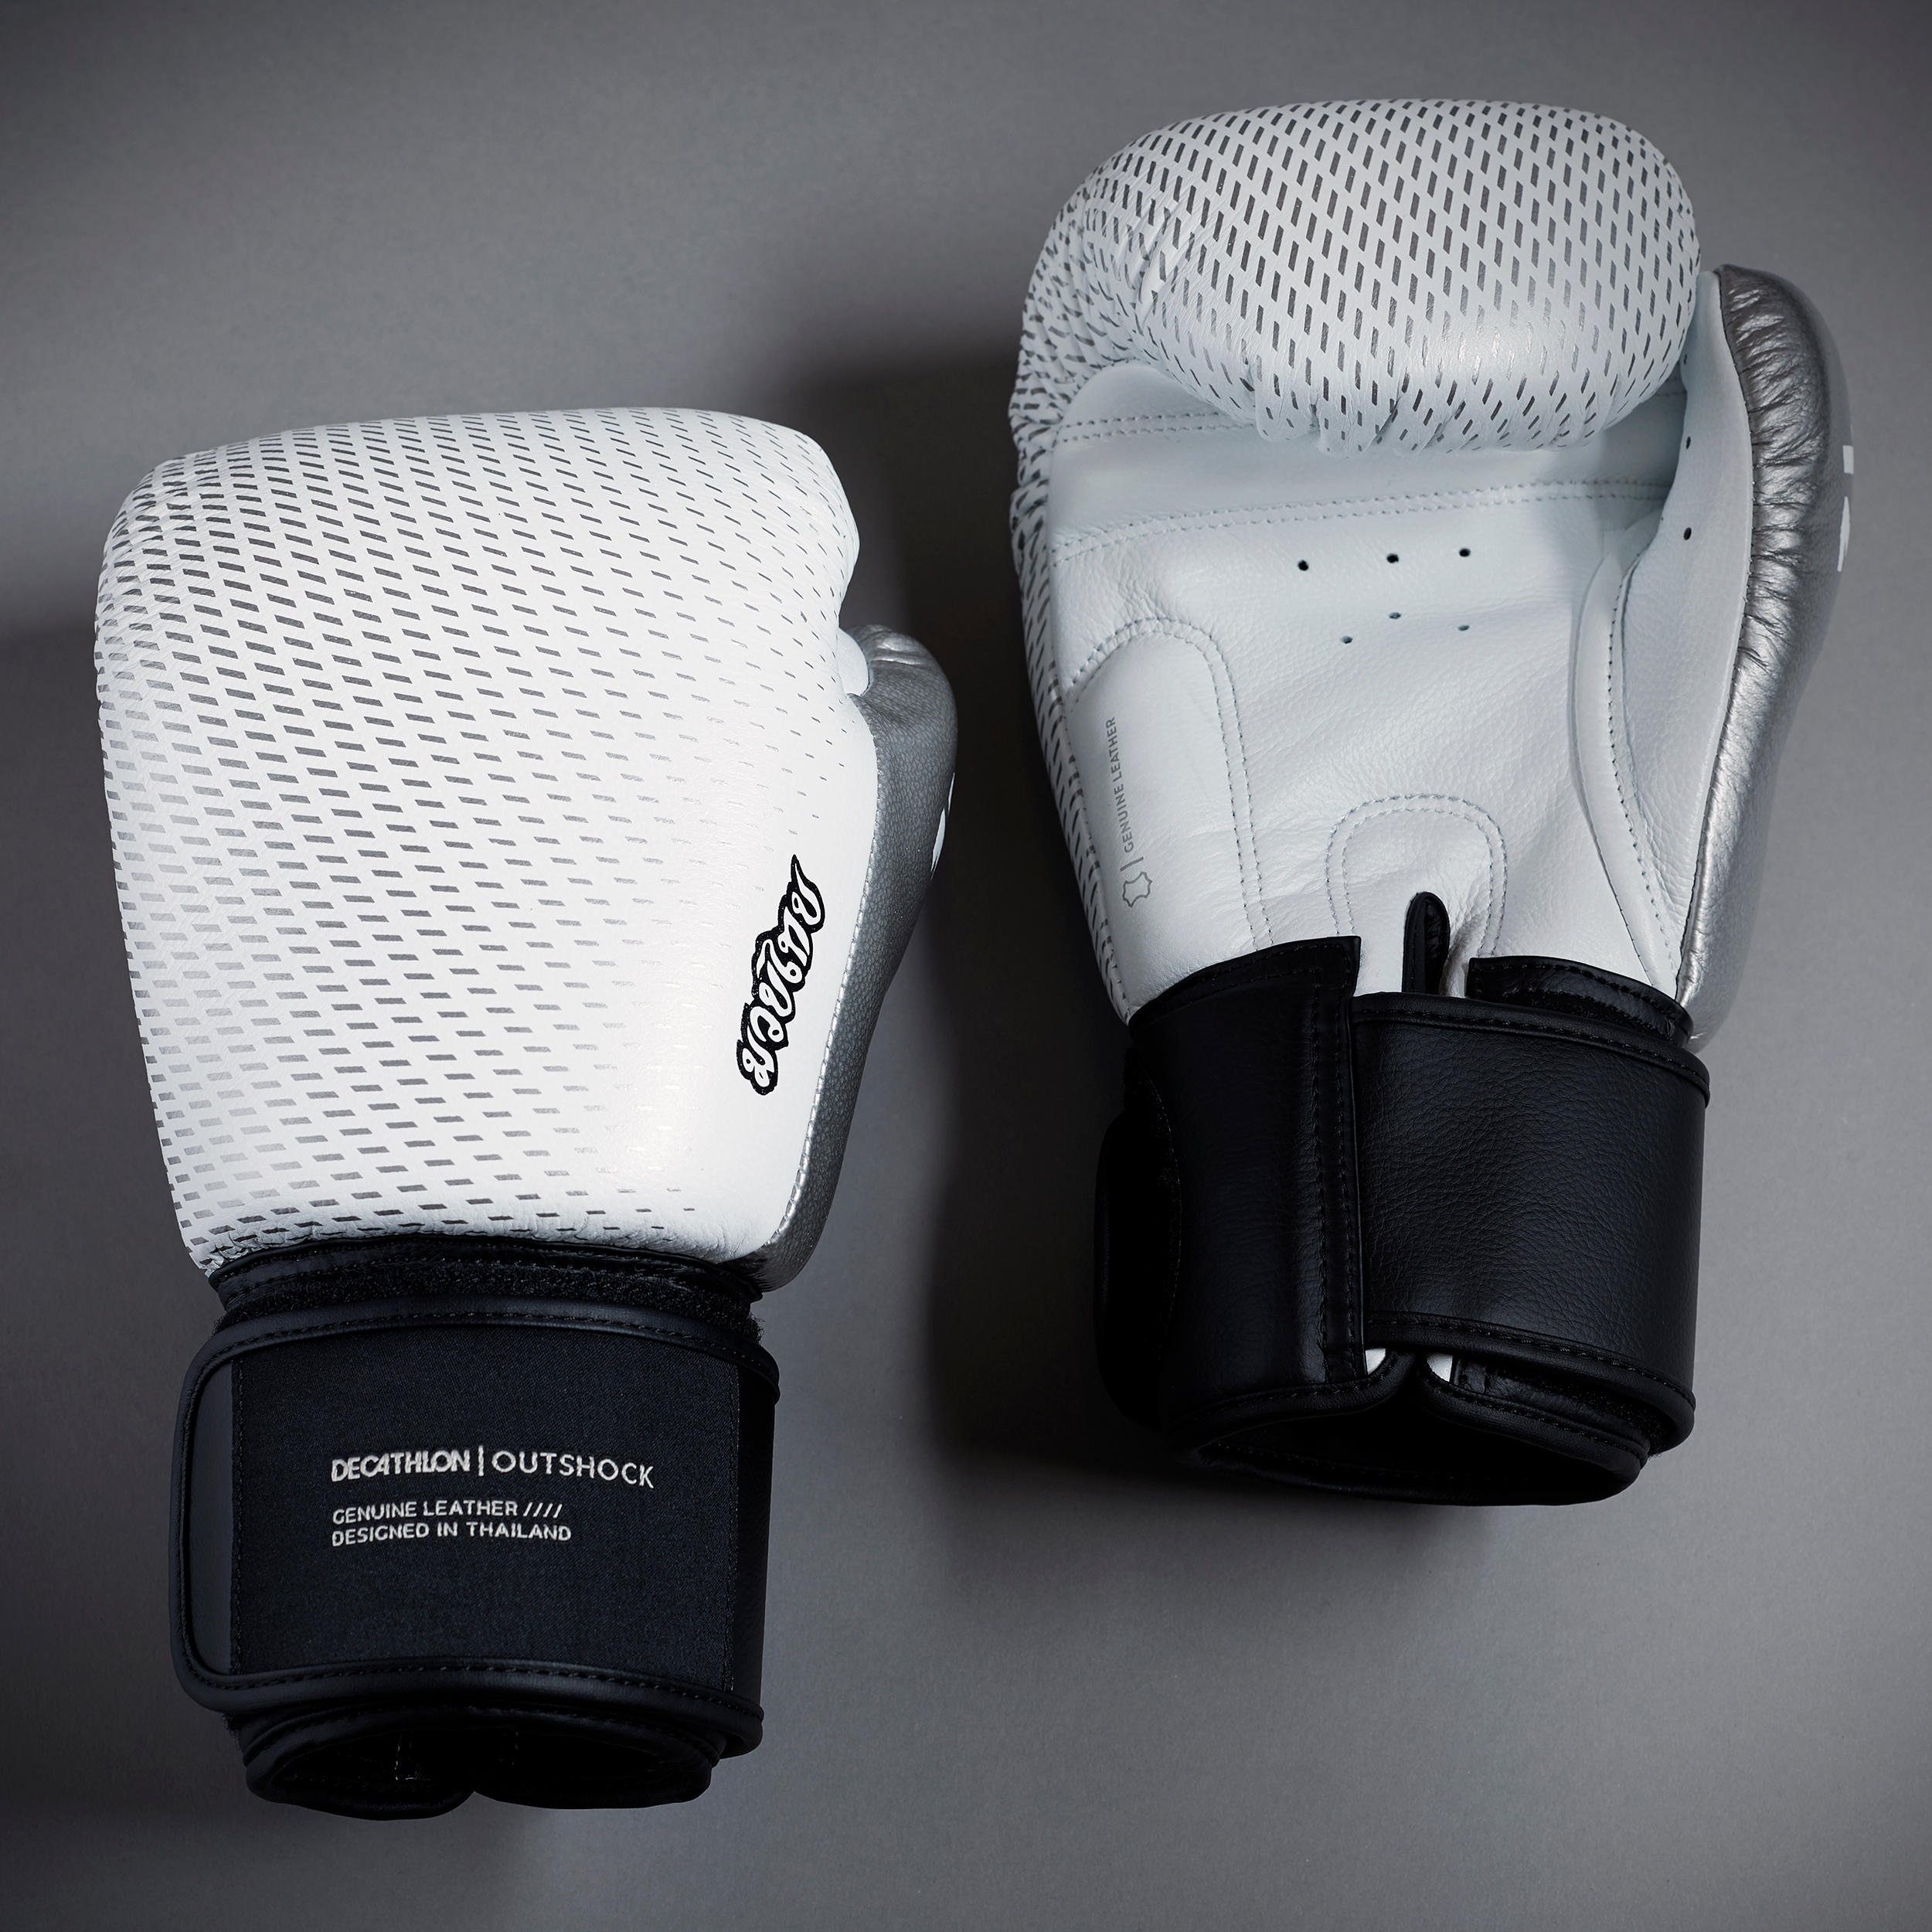 Boxing Gloves Muay Thai Leather Gloves 